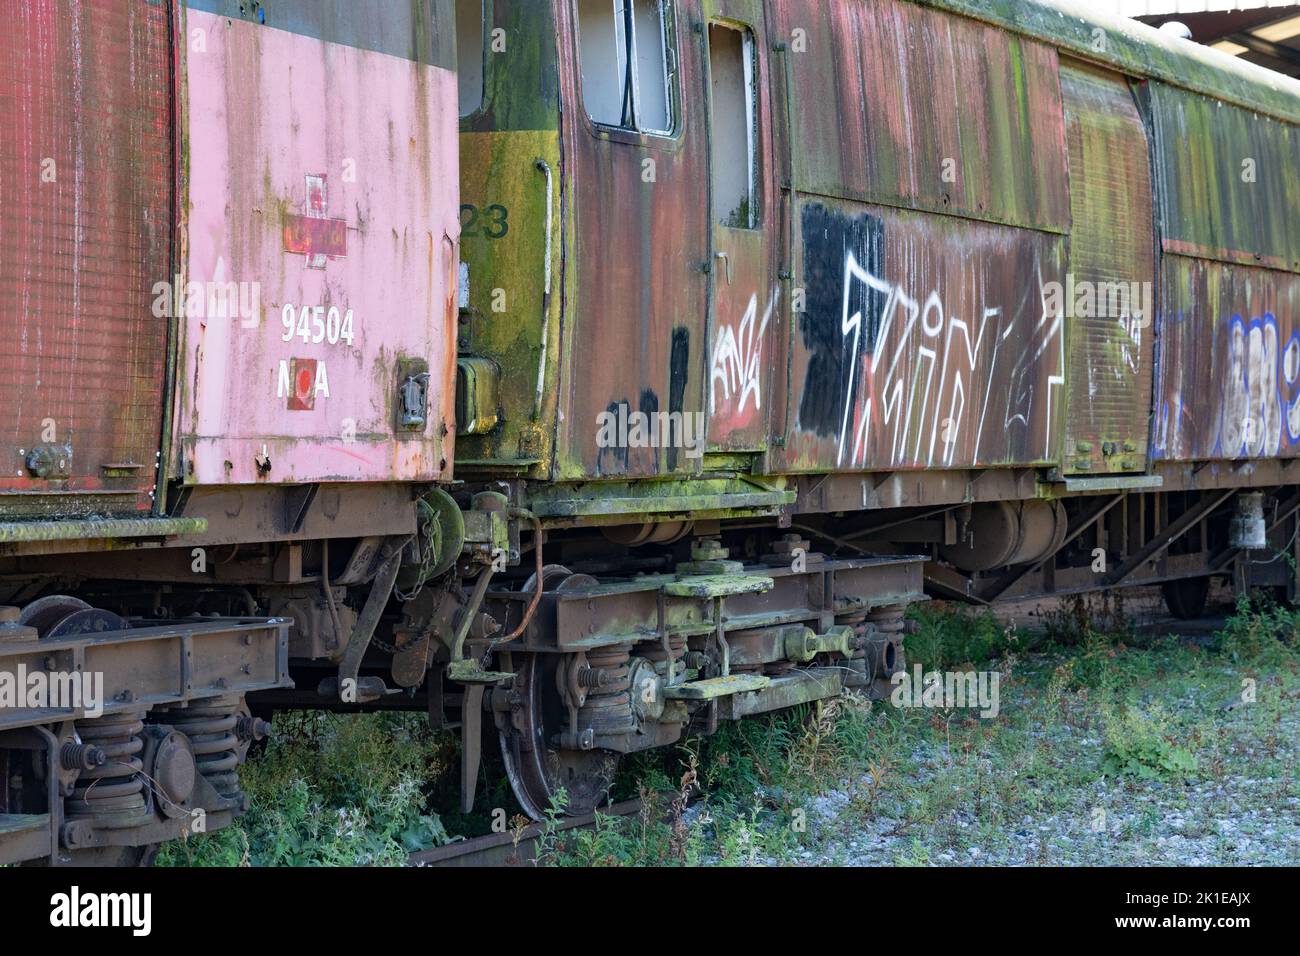 Abandoned raliway carriages at Hellifield station near Skipton, Yorkshire Stock Photo